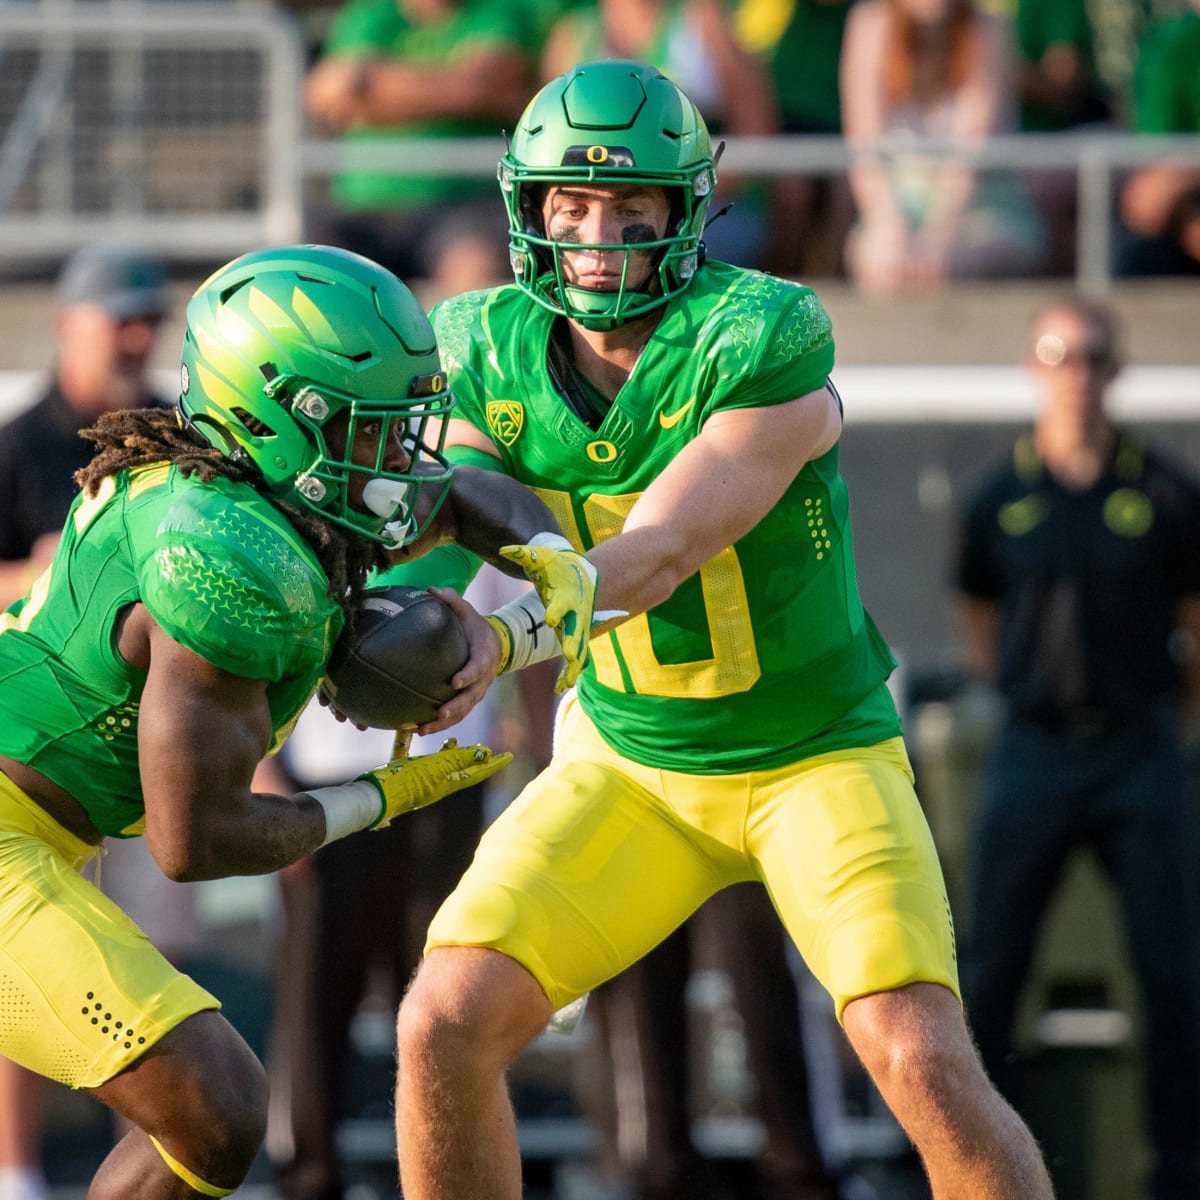 Bo Nix and Oregon are GOING TO BE SCARY IN 2022 